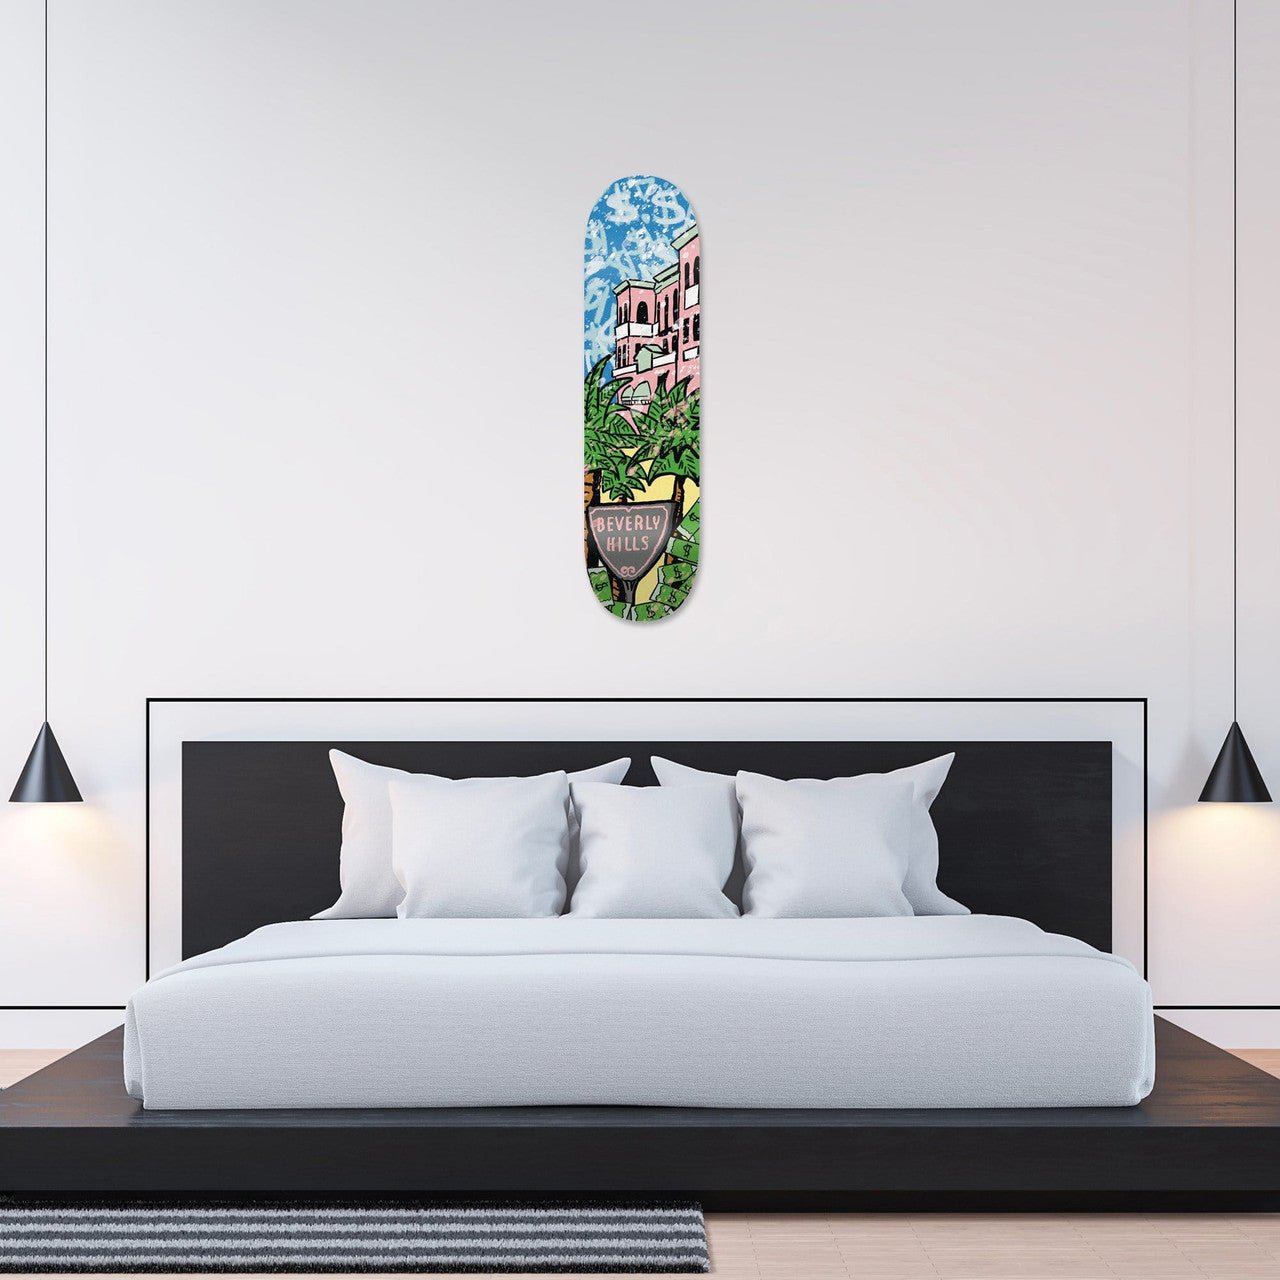 "Beverly Hills: Palm Mansion" - Skateboard - The Art Lab Acrylic Glass Art - Skateboards, Surfboards & Glass Prints Wall Decor for your Home.